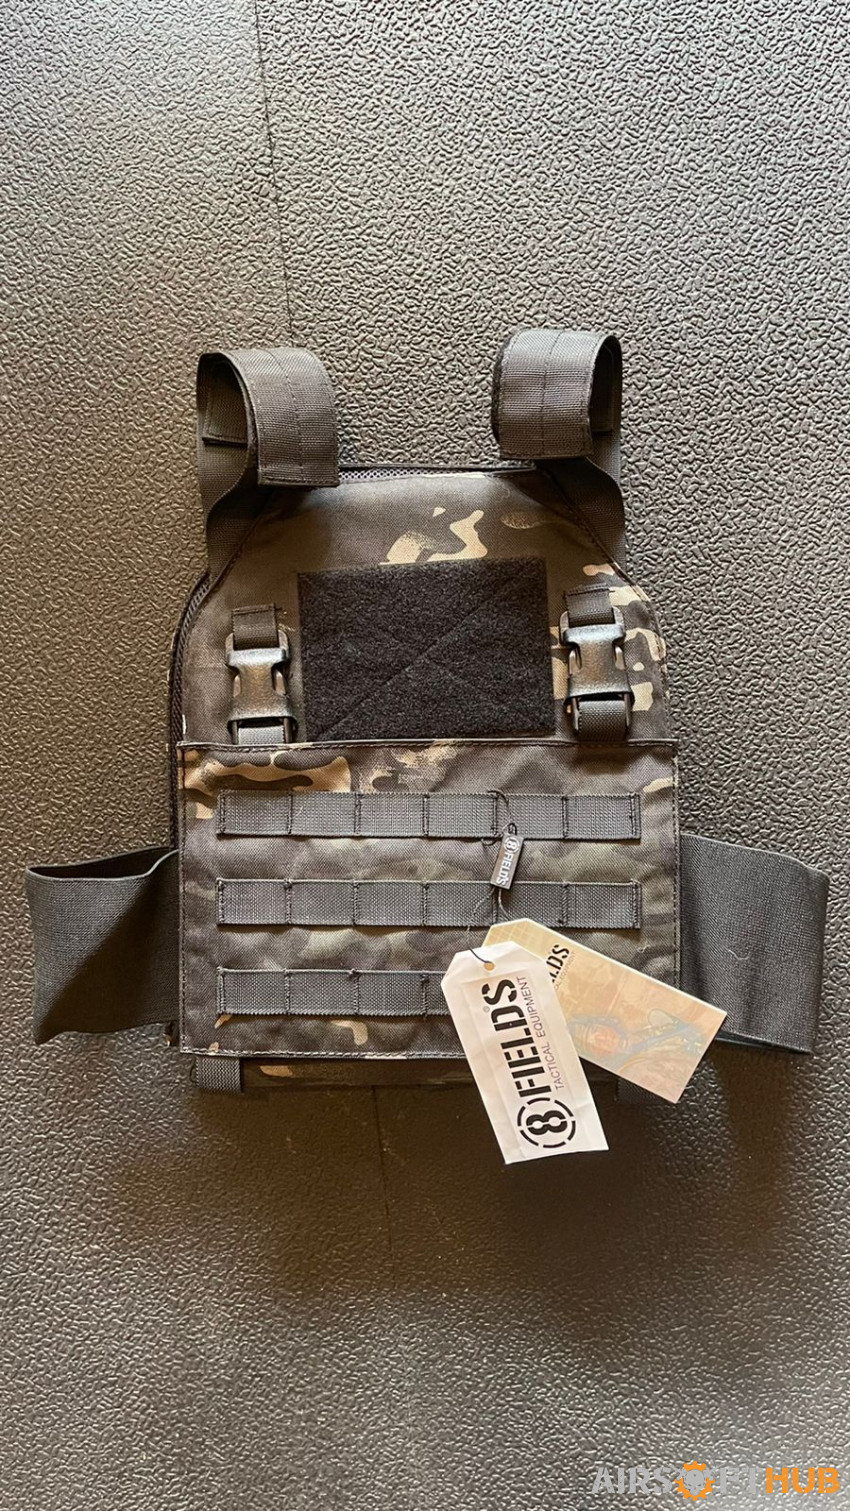 Unused gear for sale - Used airsoft equipment